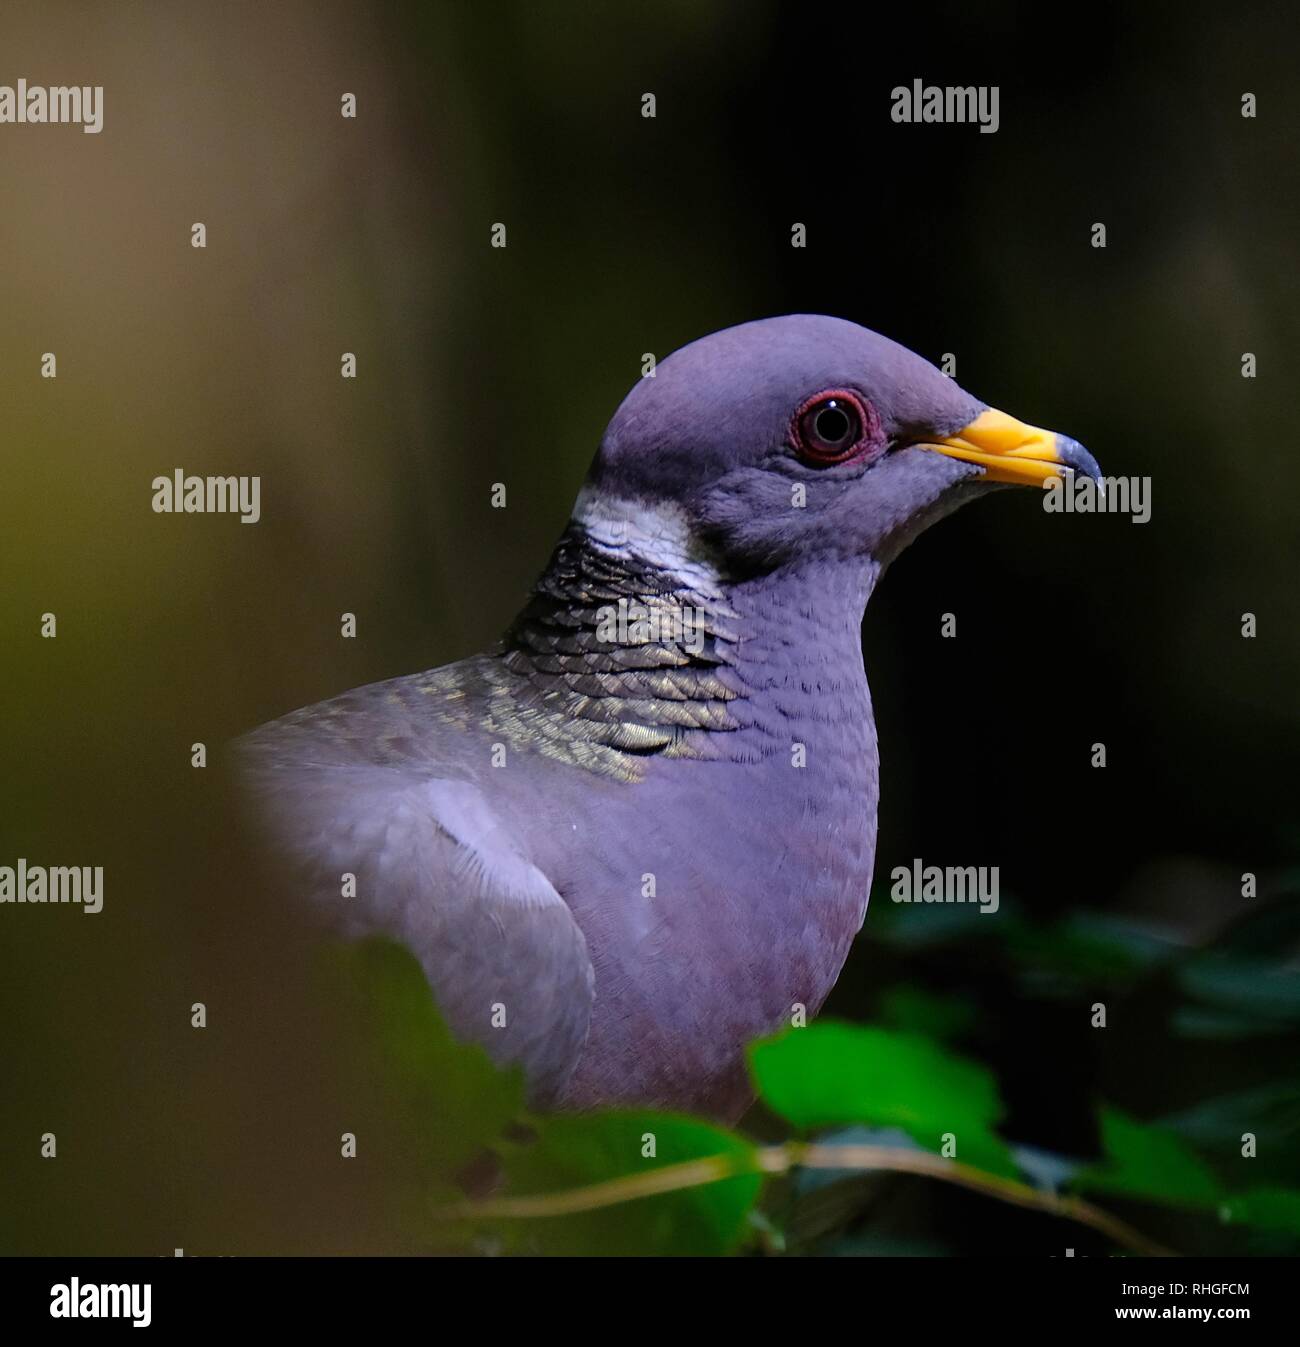 Band tailed pigeon Stock Photo